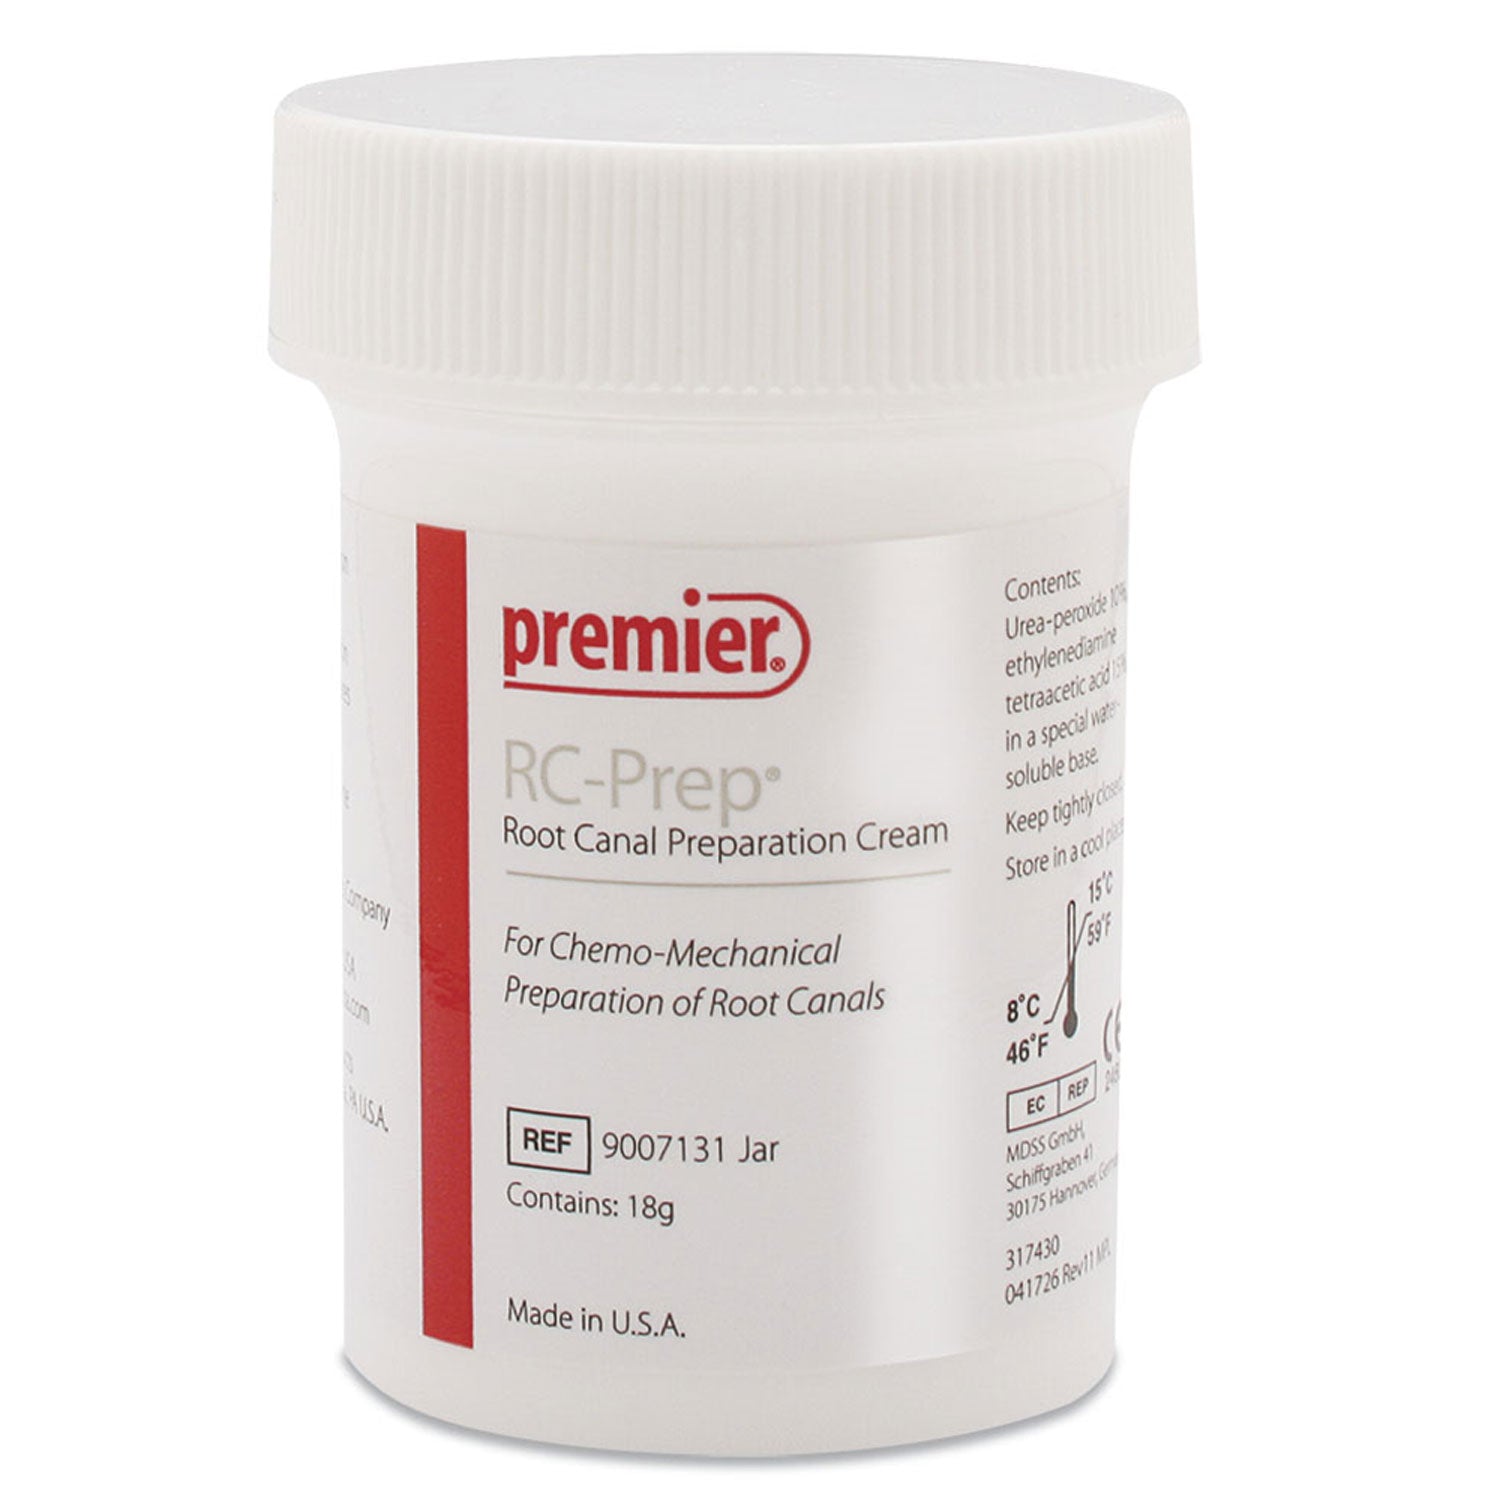 Premier RC-Prep for Chemo-Mechanical Preparation of Root Canals - Organic Debris Removal- 18g Jar